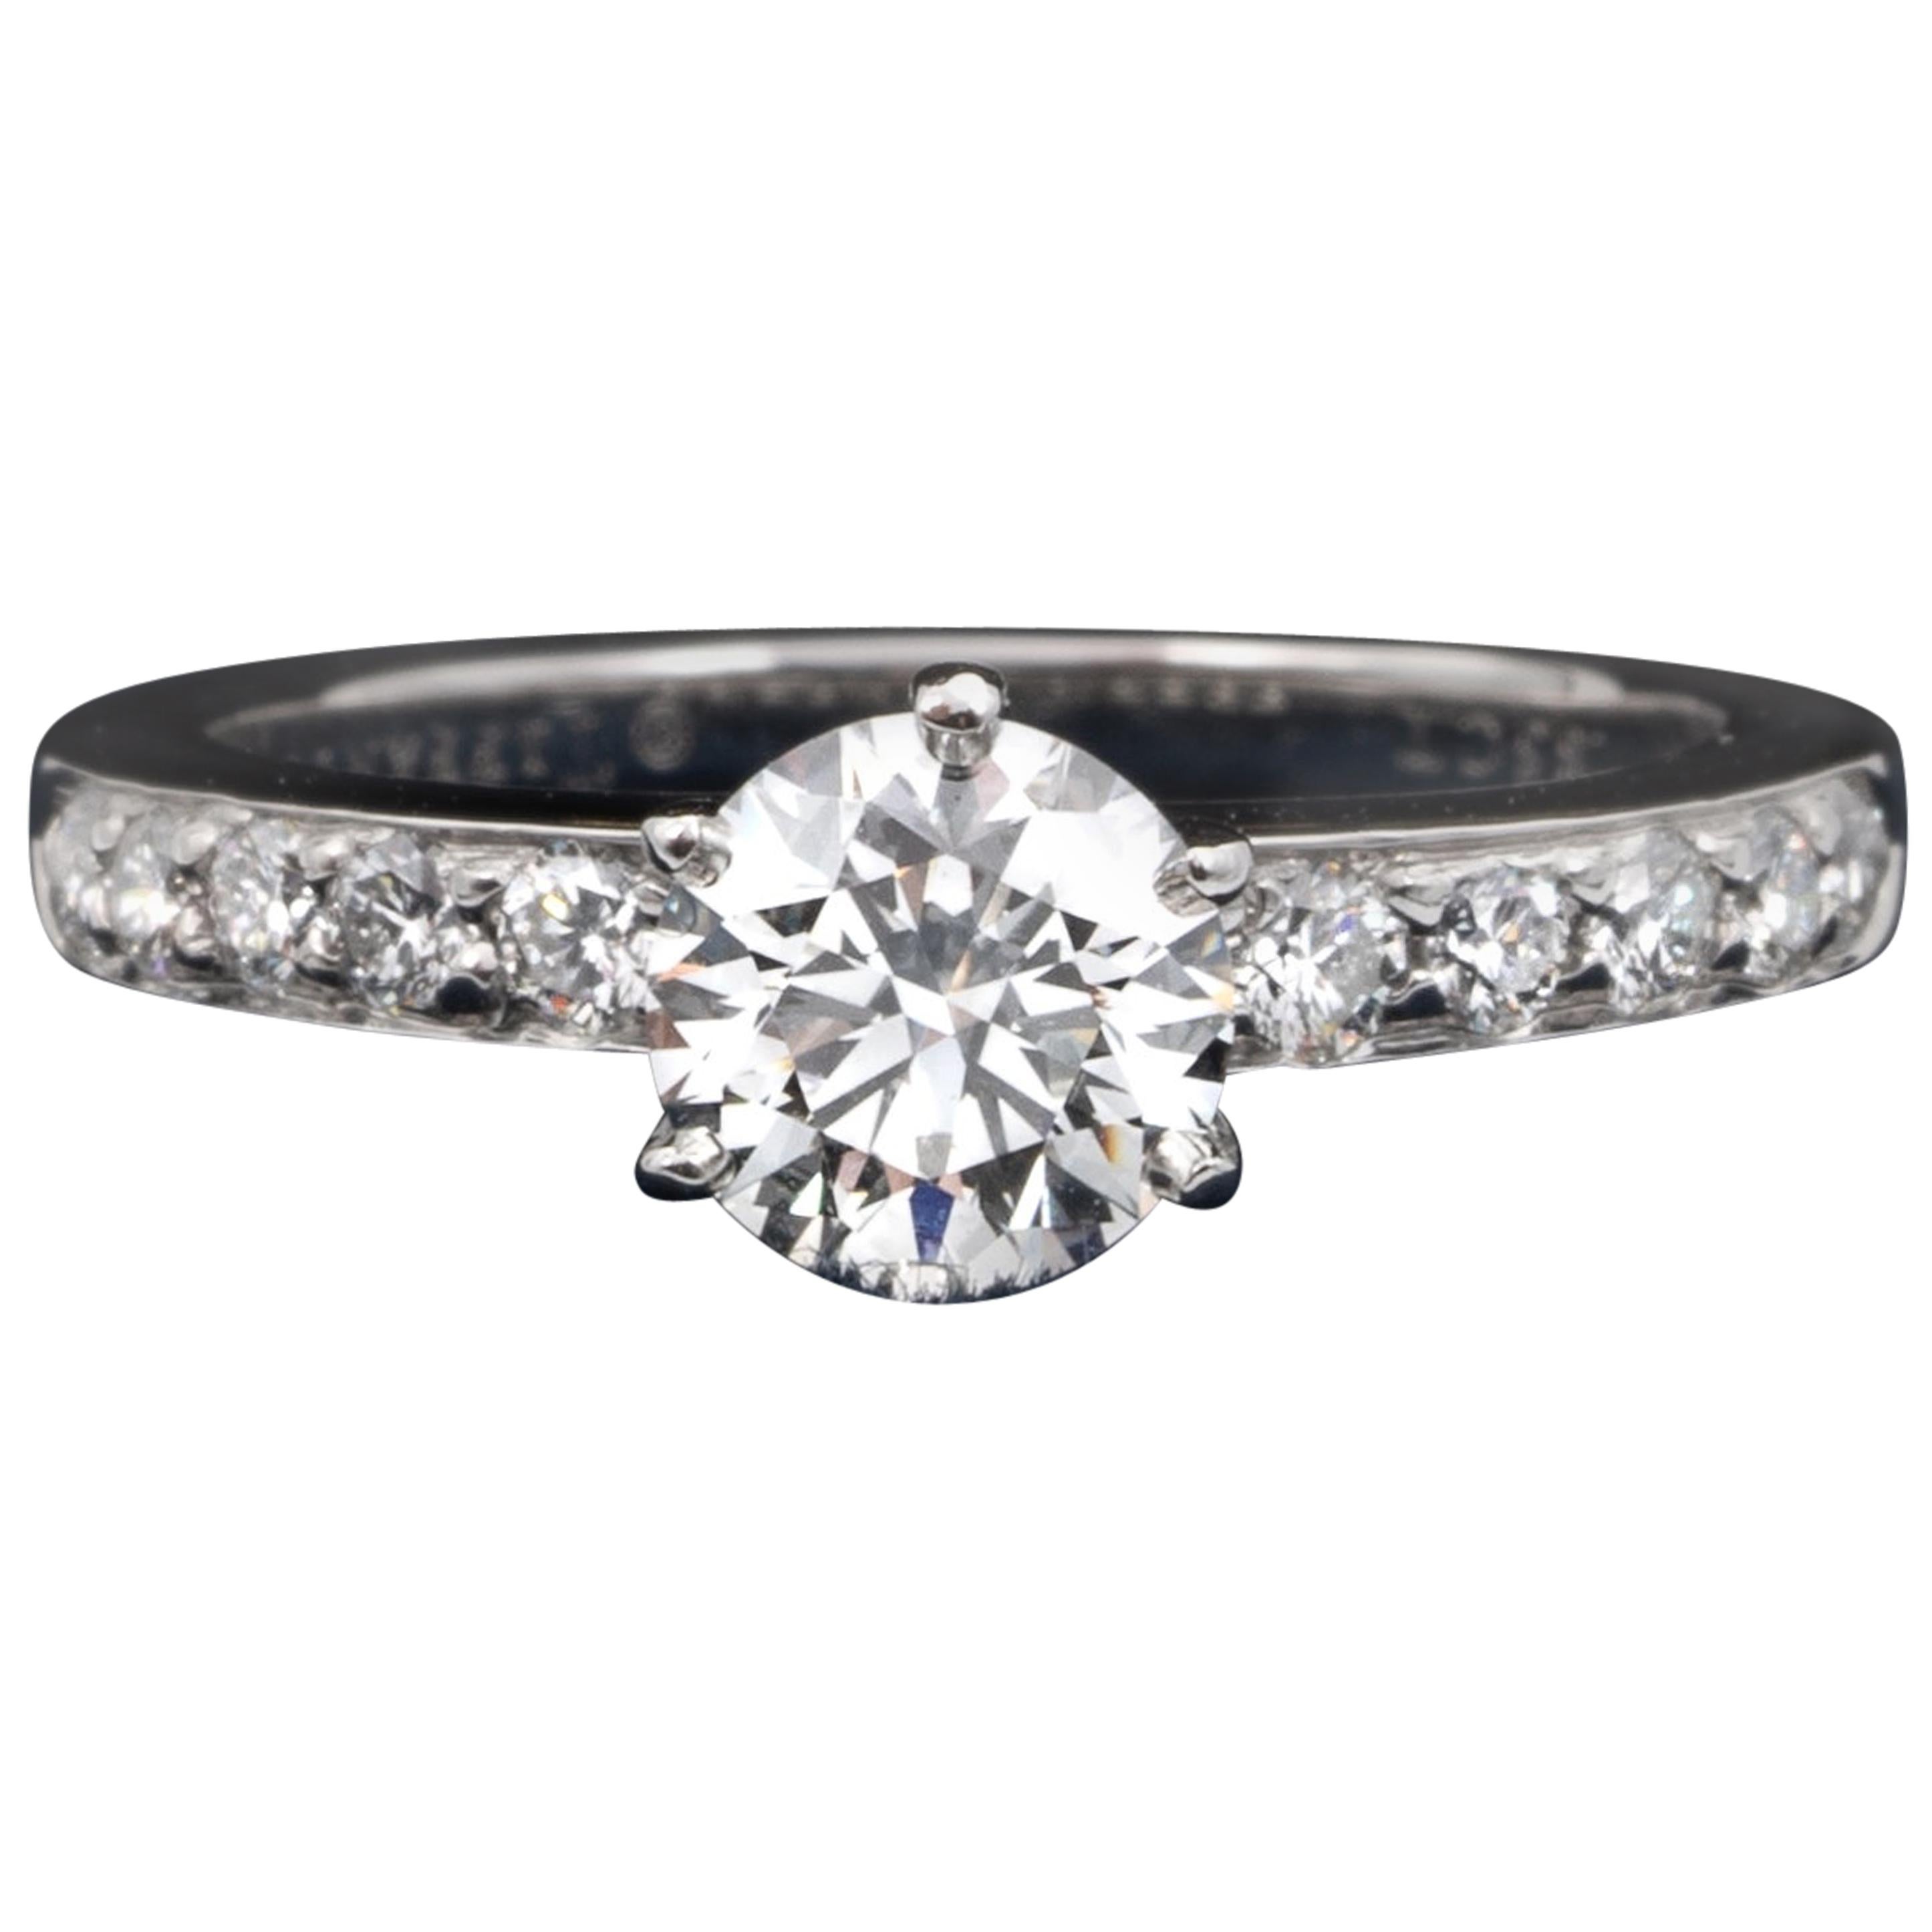 Tiffany & Co Diamond Engagement Solitaire signed by Tiffany & Co. featuring a .85 carat Center, graded G Color , and VS2 Clarity.
Highlighted with 10 brilliant cut round diamonds weighing approximately .24 Cts Total
With original papers.
Appraisal